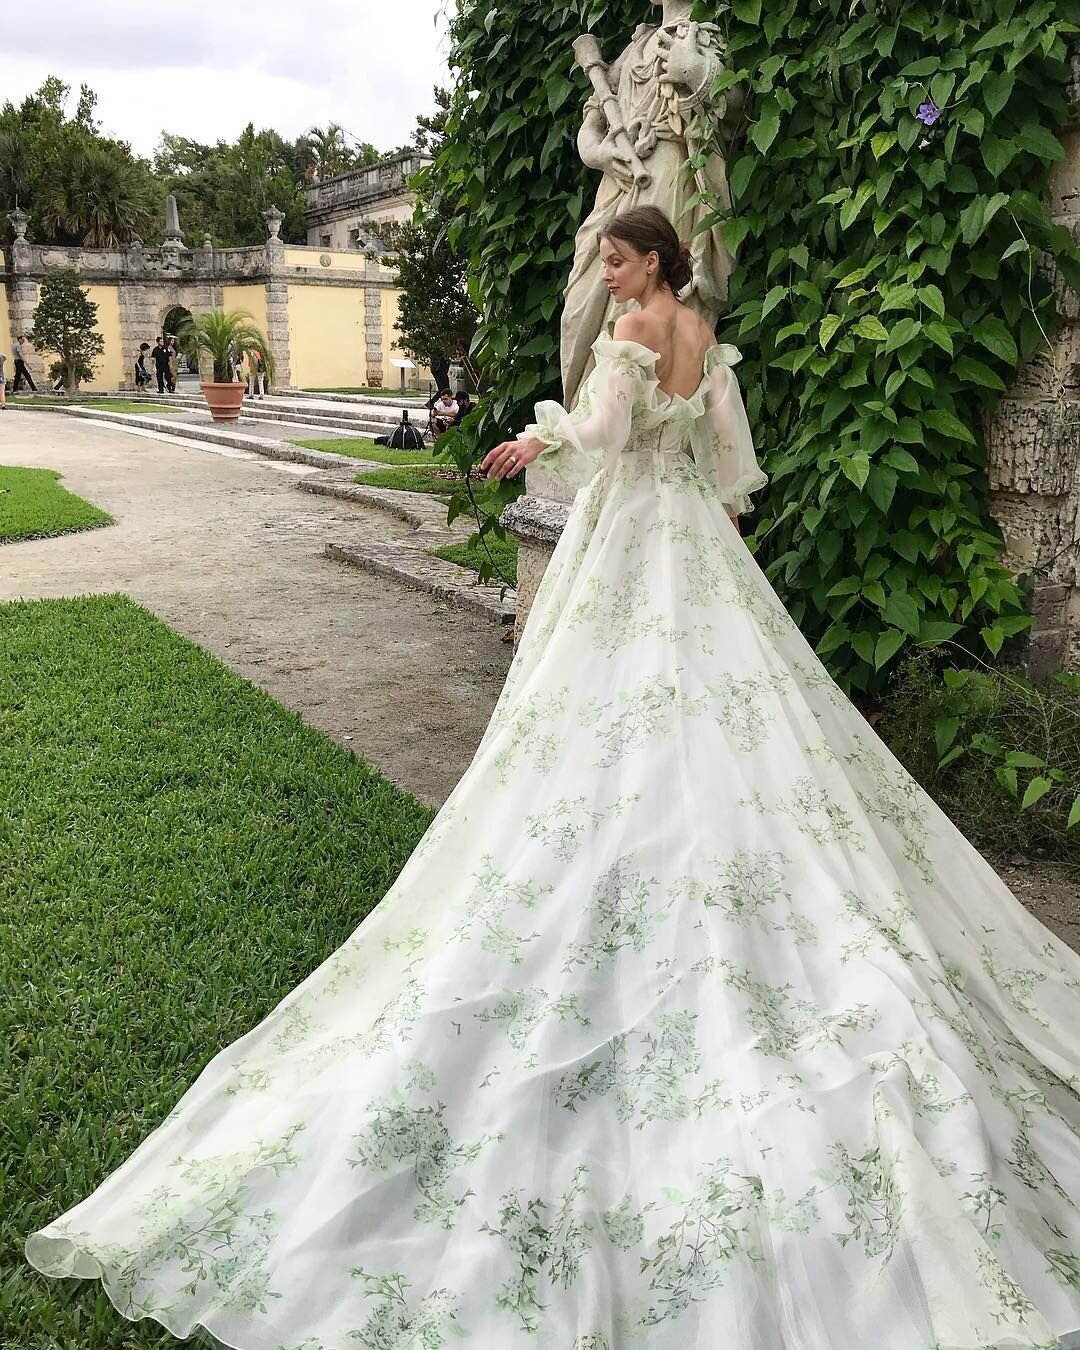 Whimsical off-the-shoulder ball gown wedding dress with green floral detail by Monique Lhuillier.